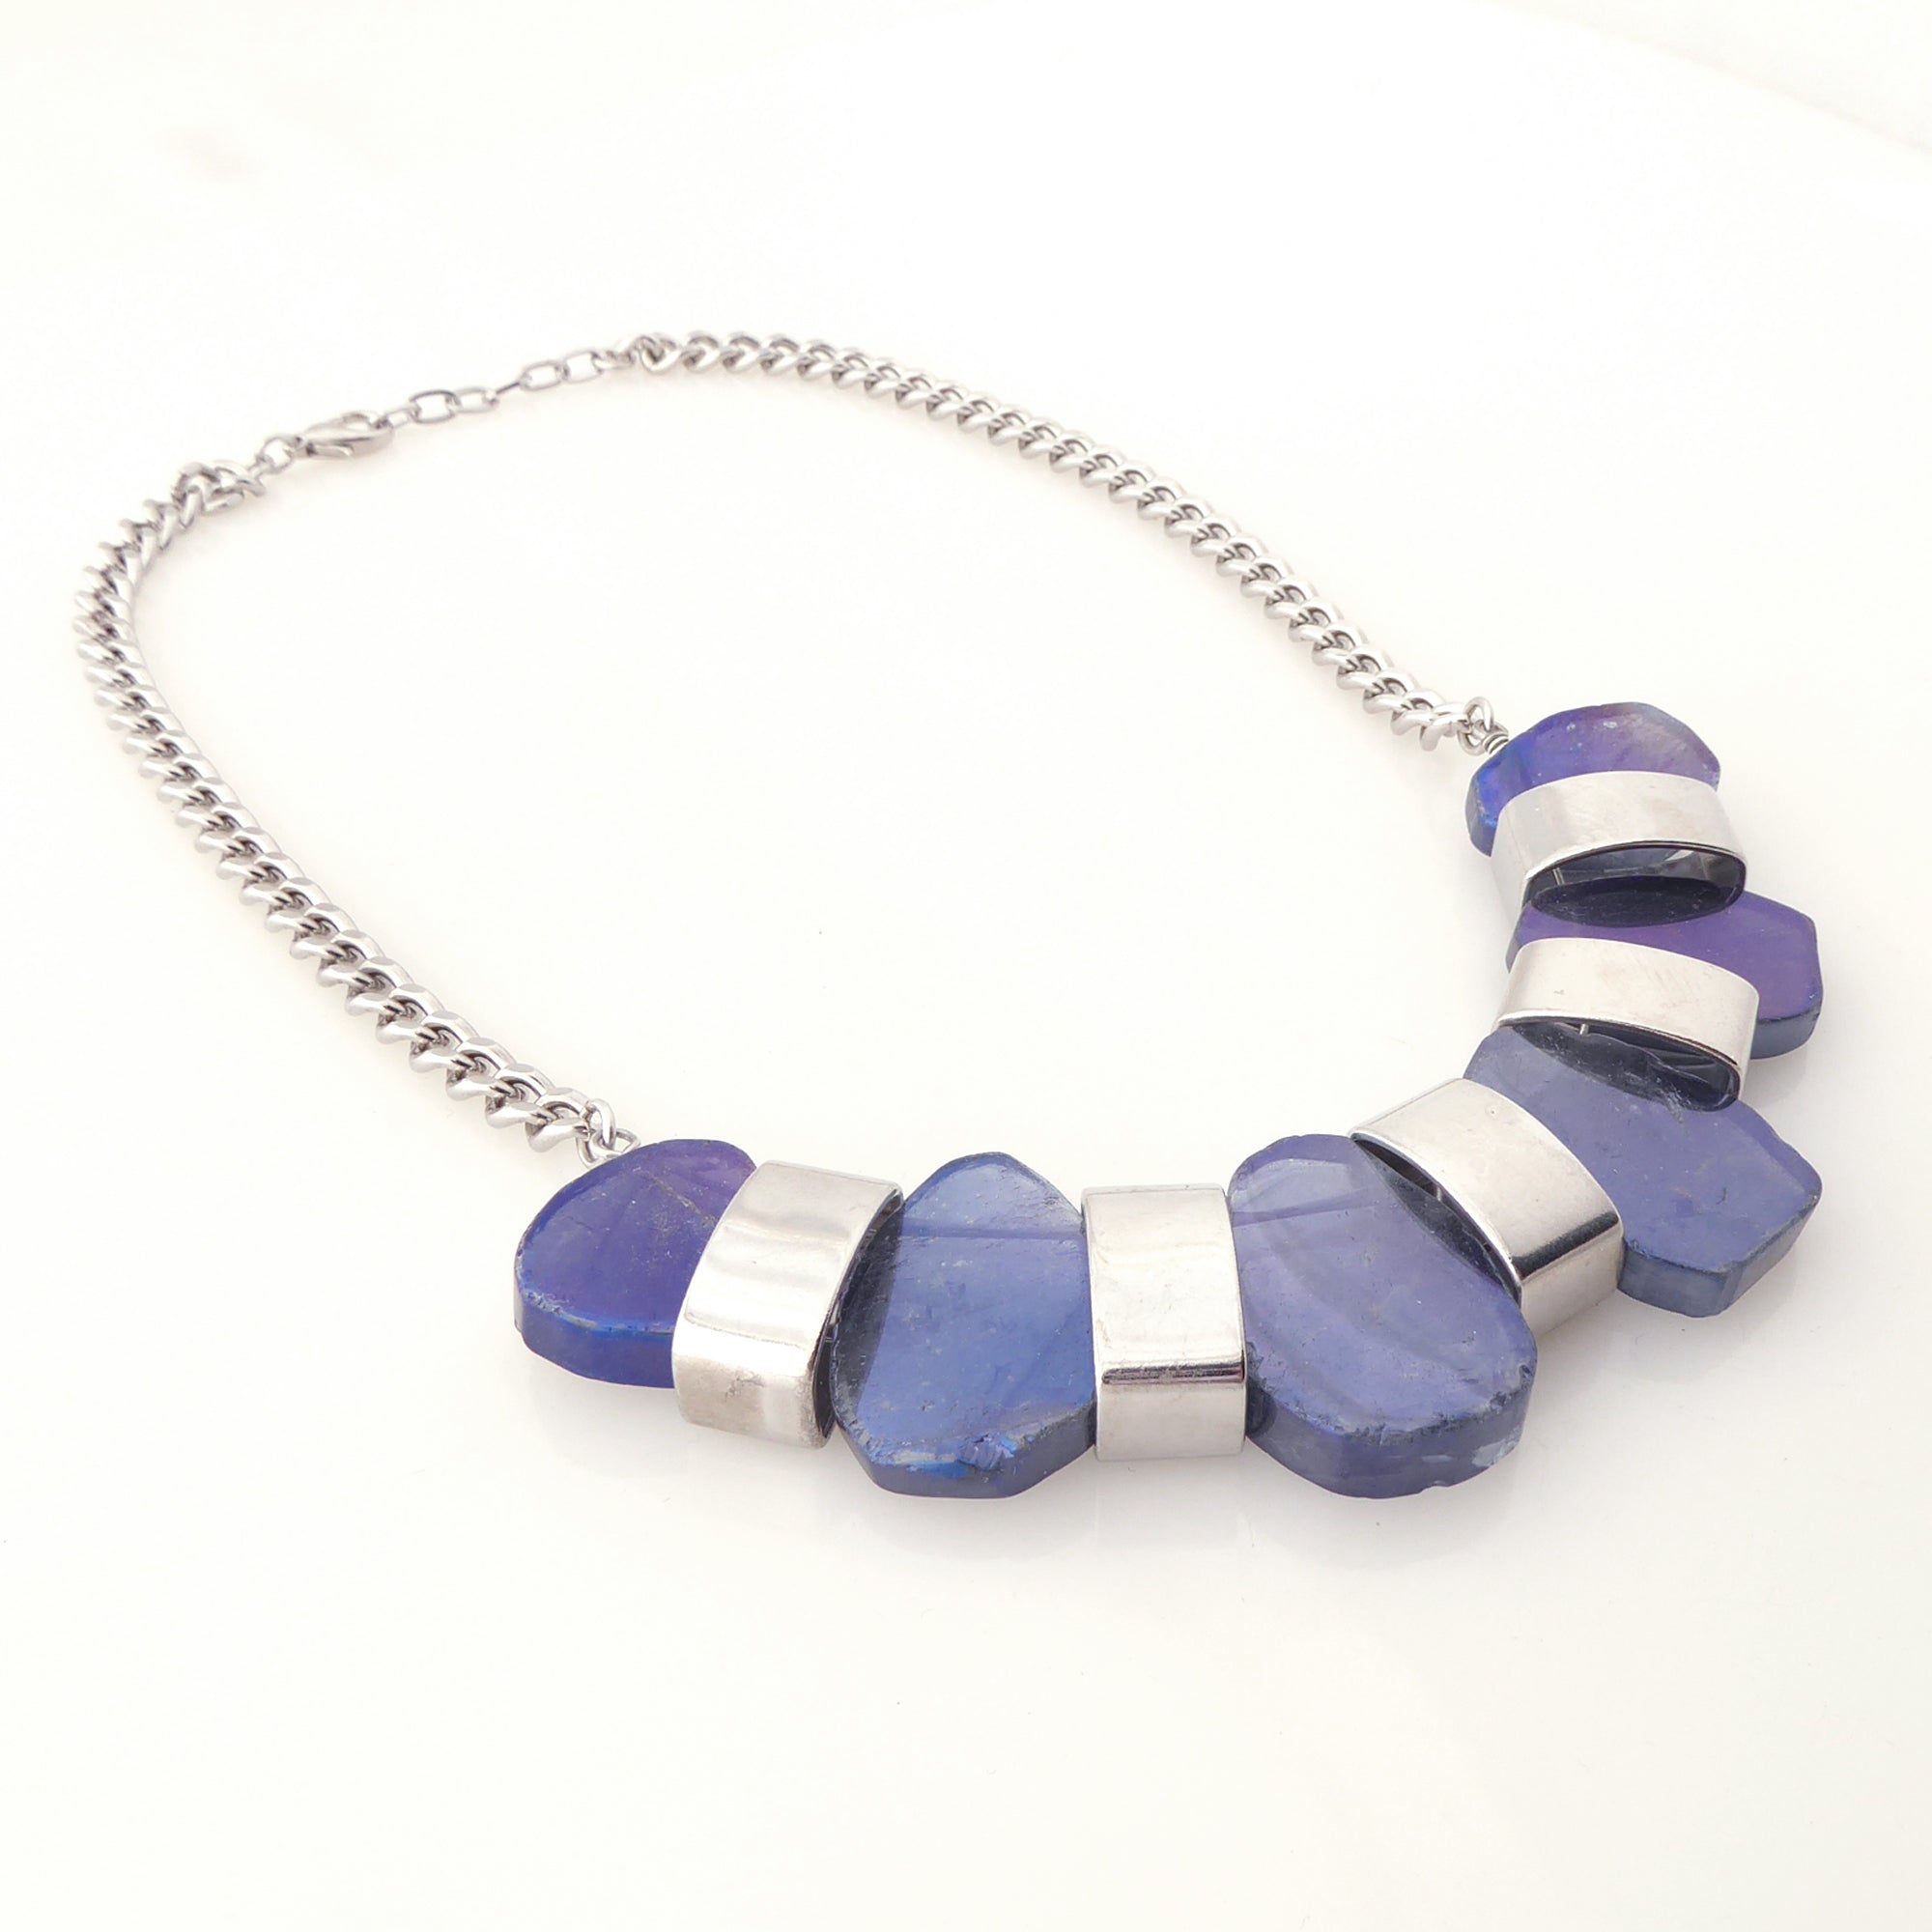 Iridescent blue agate necklace by Jenny Dayco 2